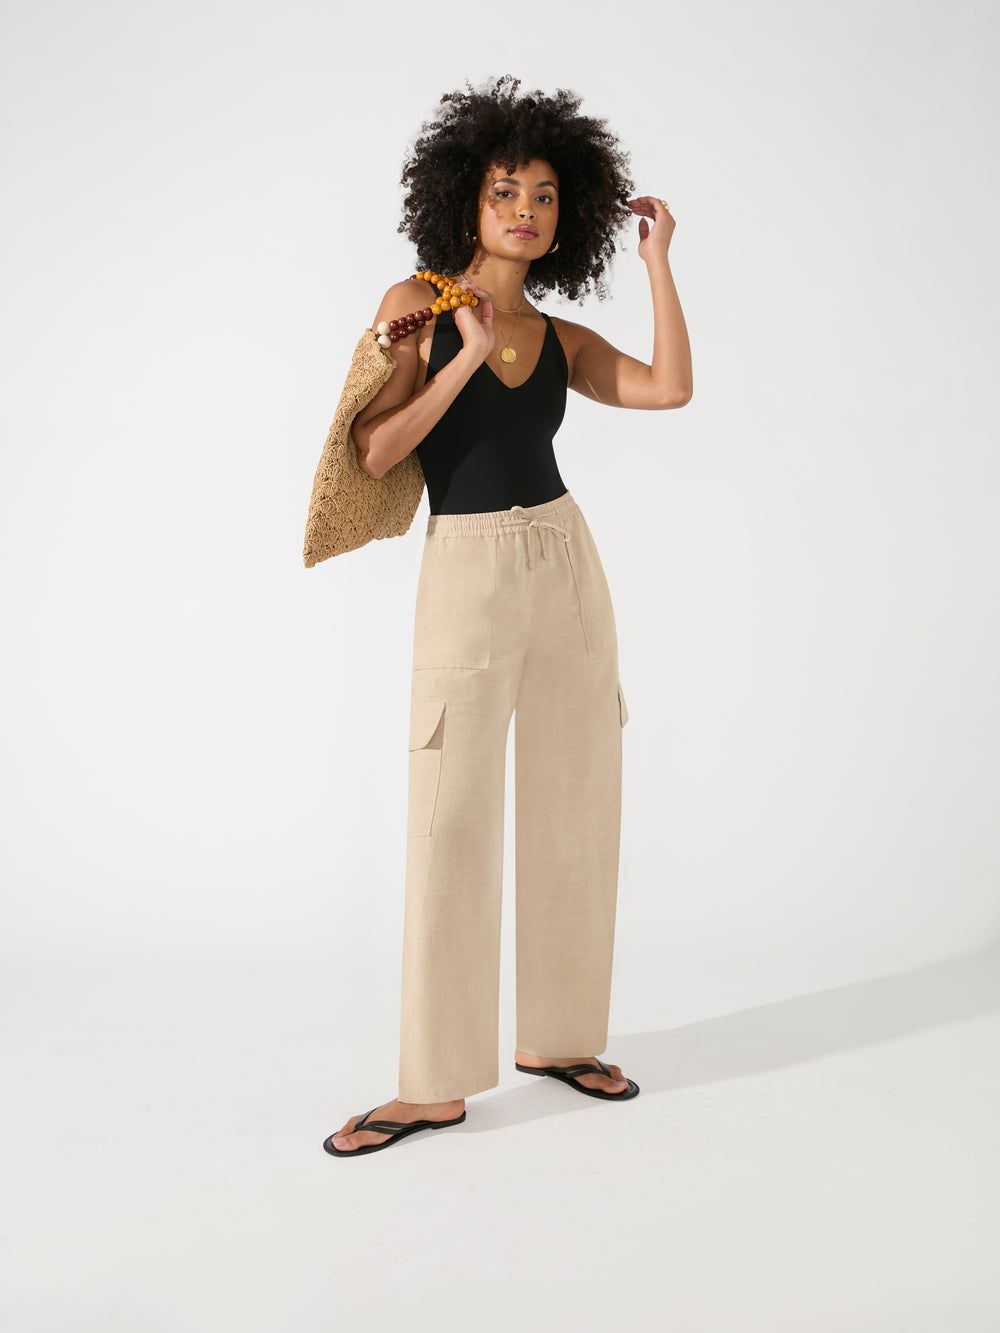 High Waisted Zip Up Wide Leg Jeans  Wide leg cargo pants outfit Wide leg  denim Brown cargo pants outfit women